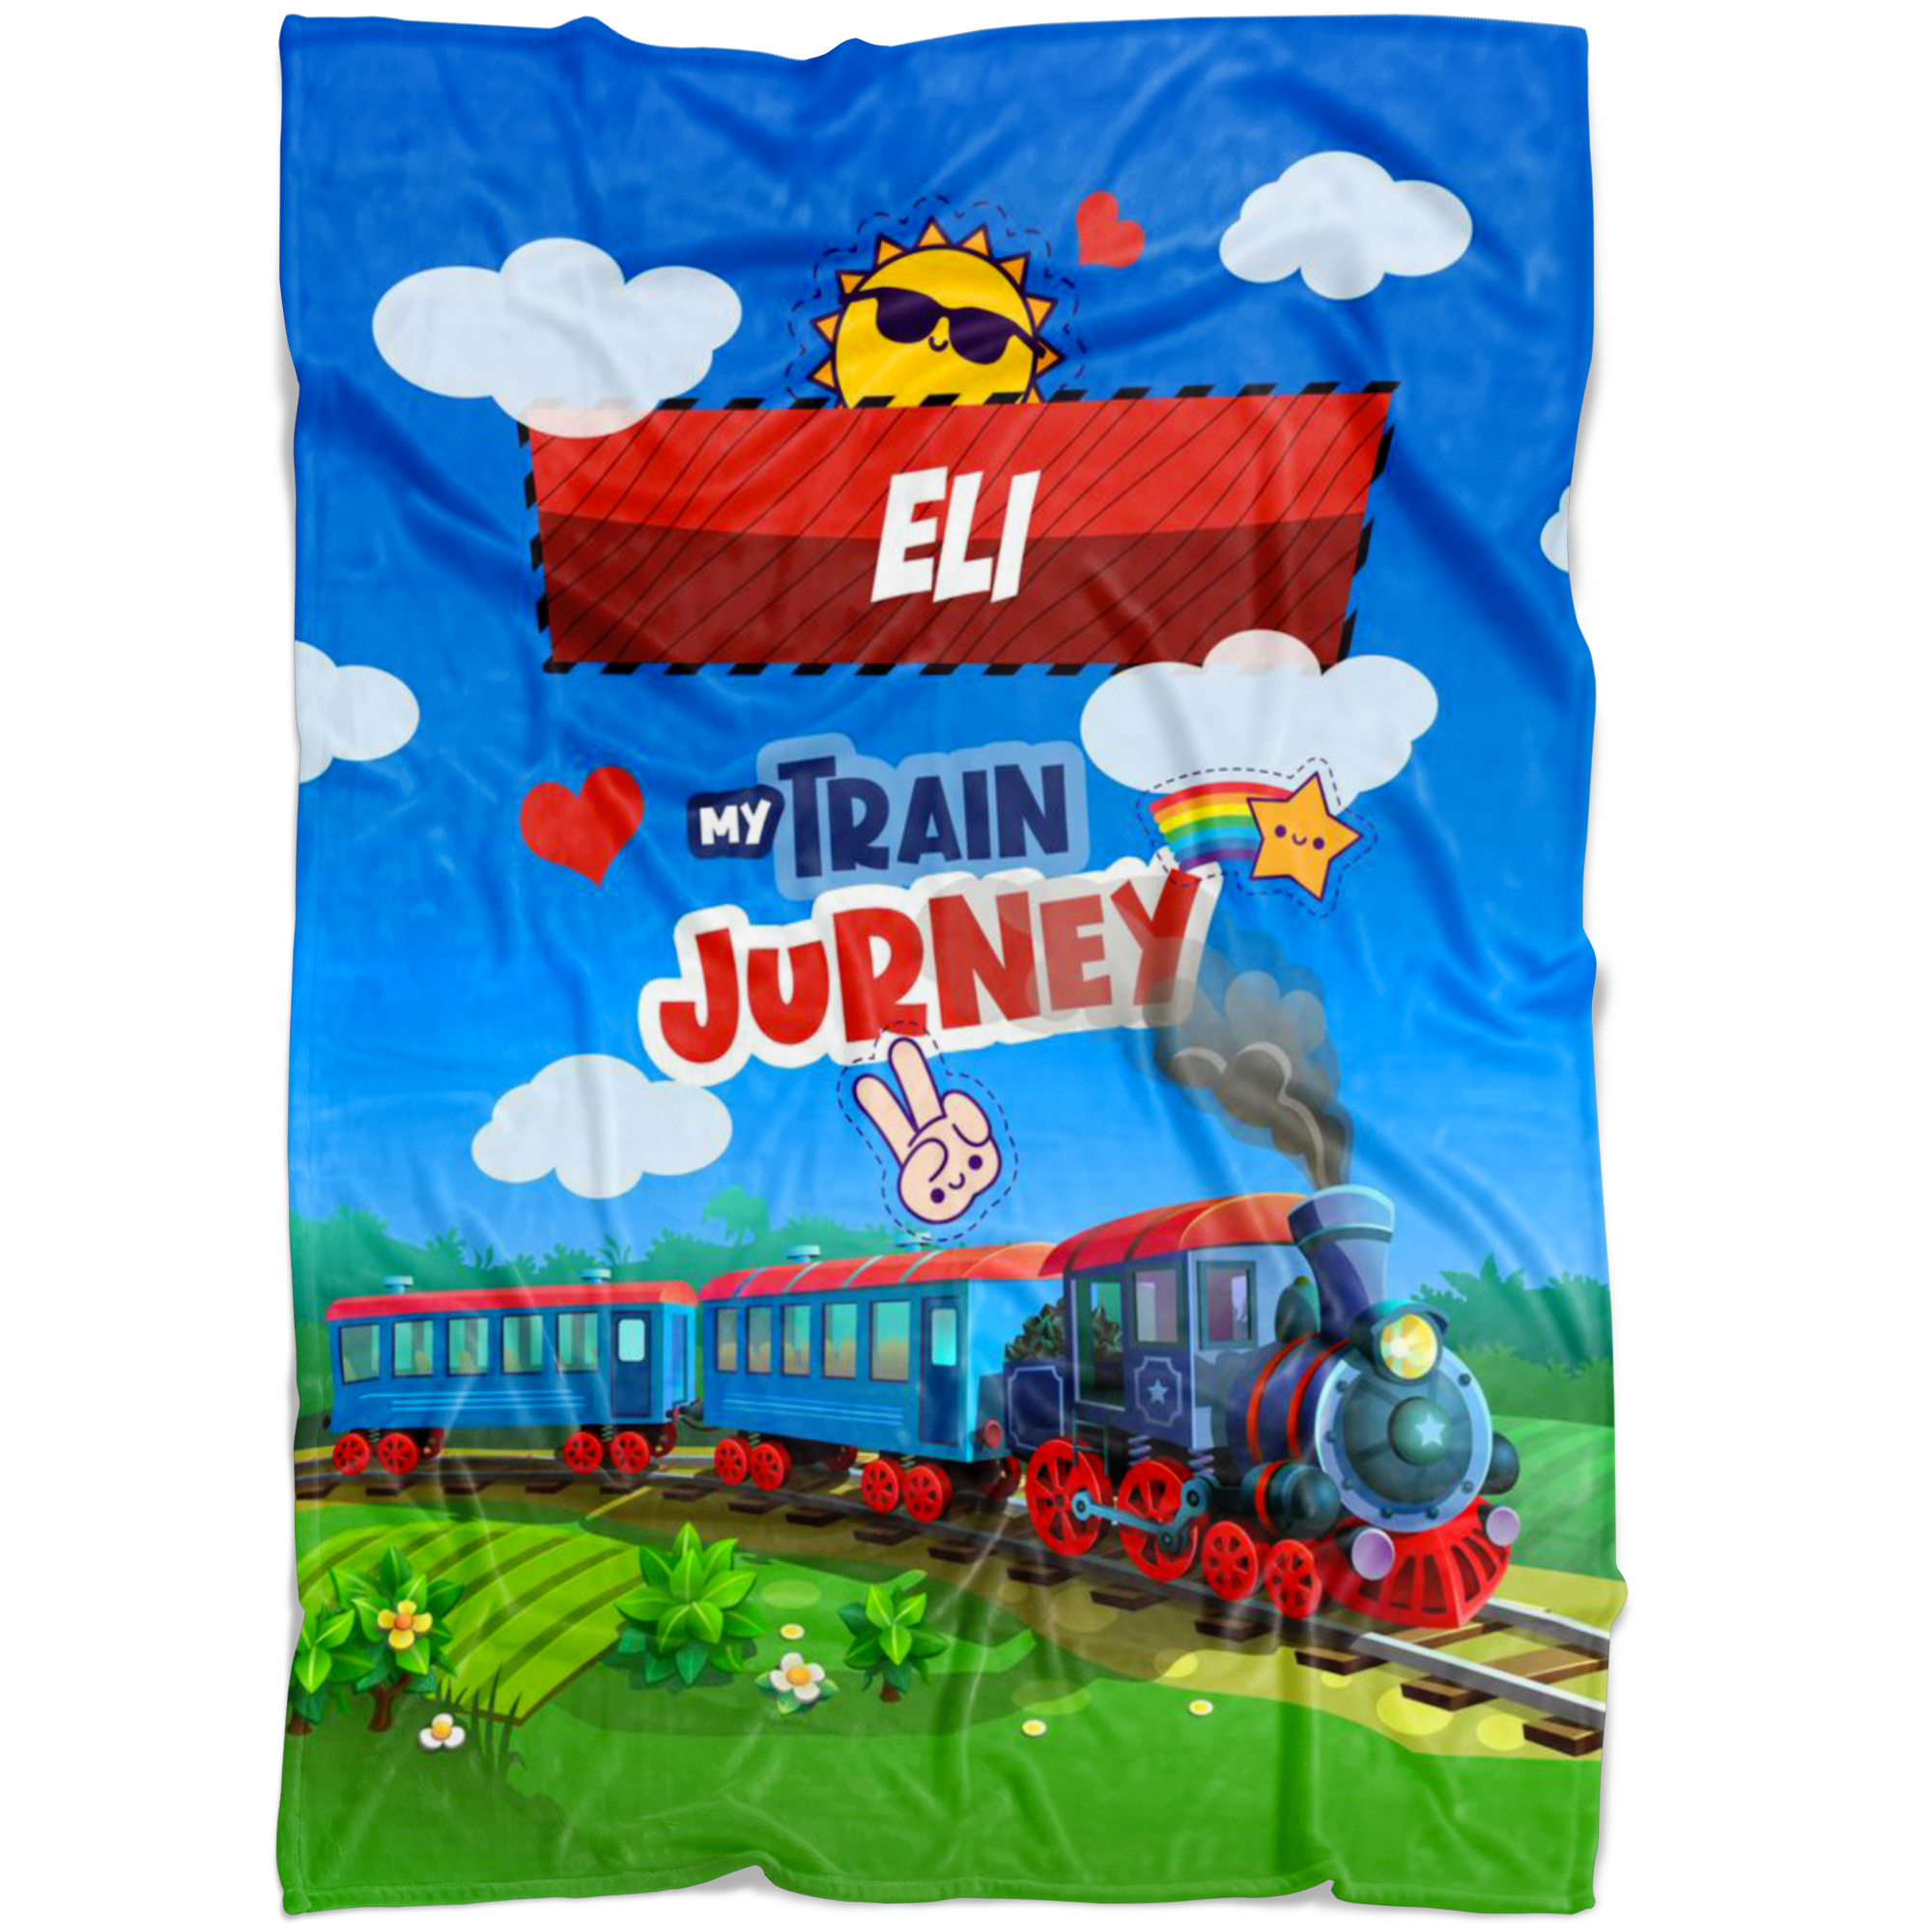 Personalized Name Train in Mountains Blanket for Kids - Eli